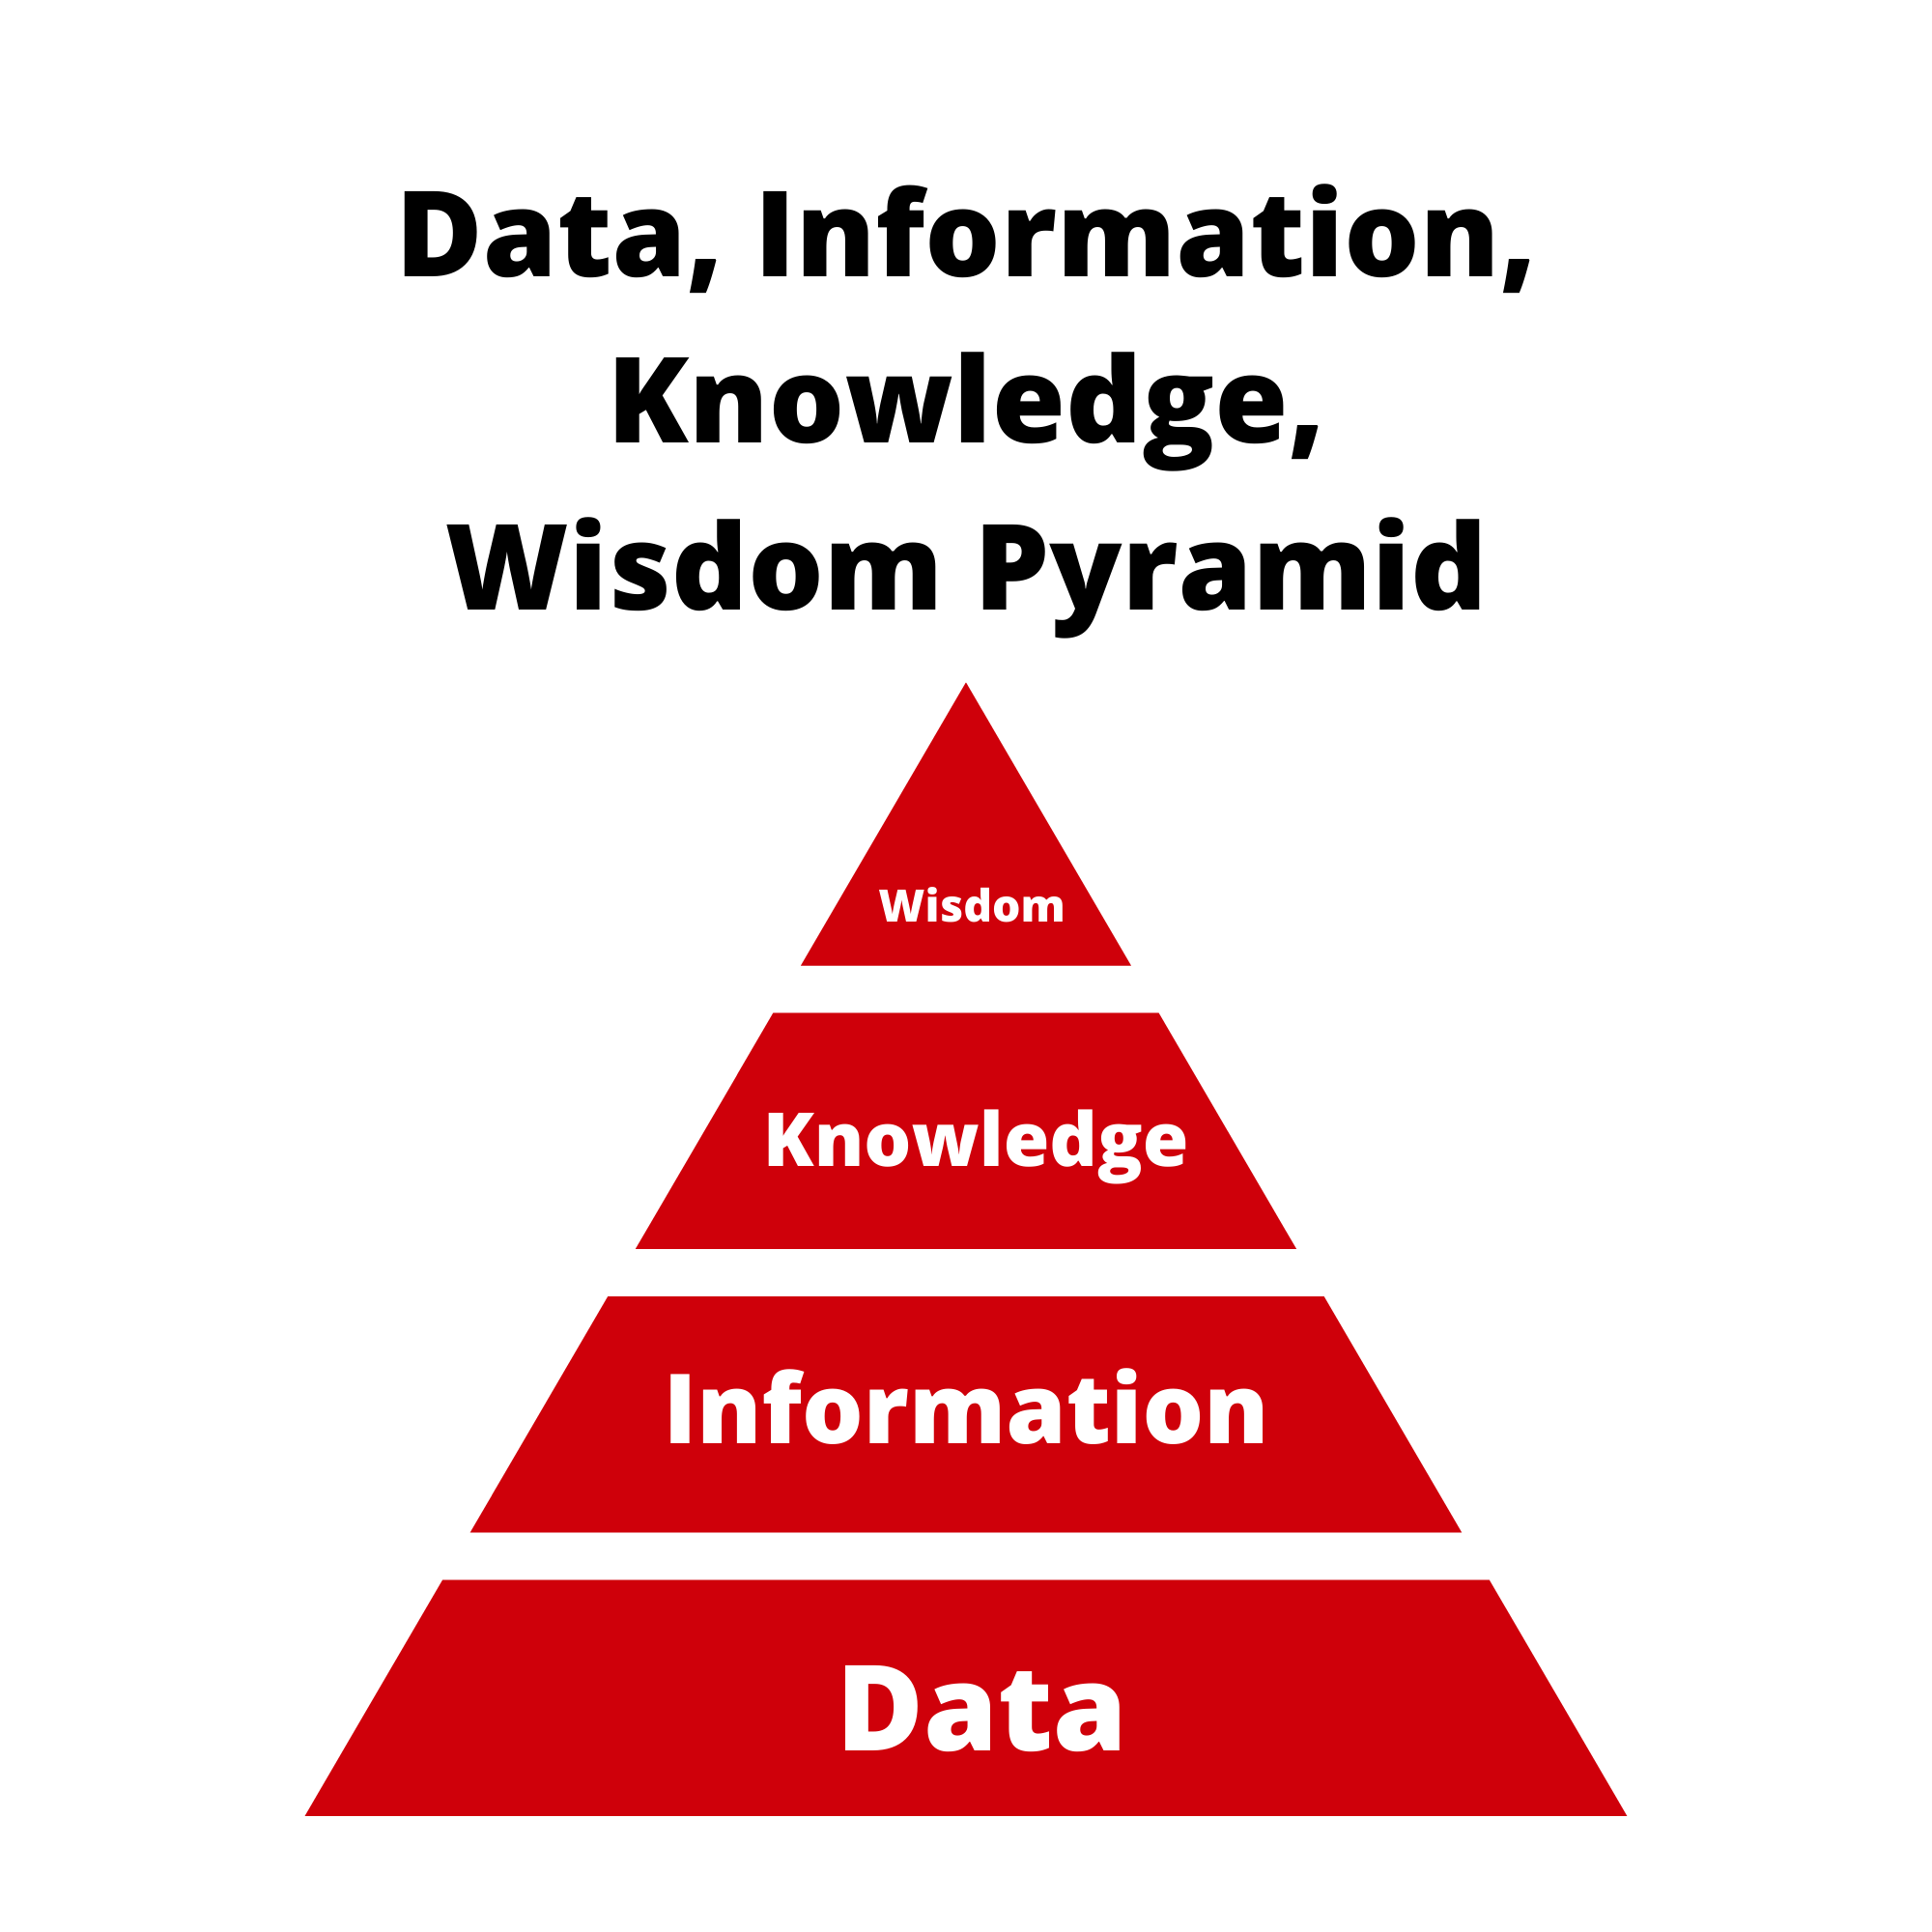 Illustration of the Data, Information, Knowledge, Wisdom Pyramid, with wisdom at the top, followed by knowledge, information, and data, which is at the bottom